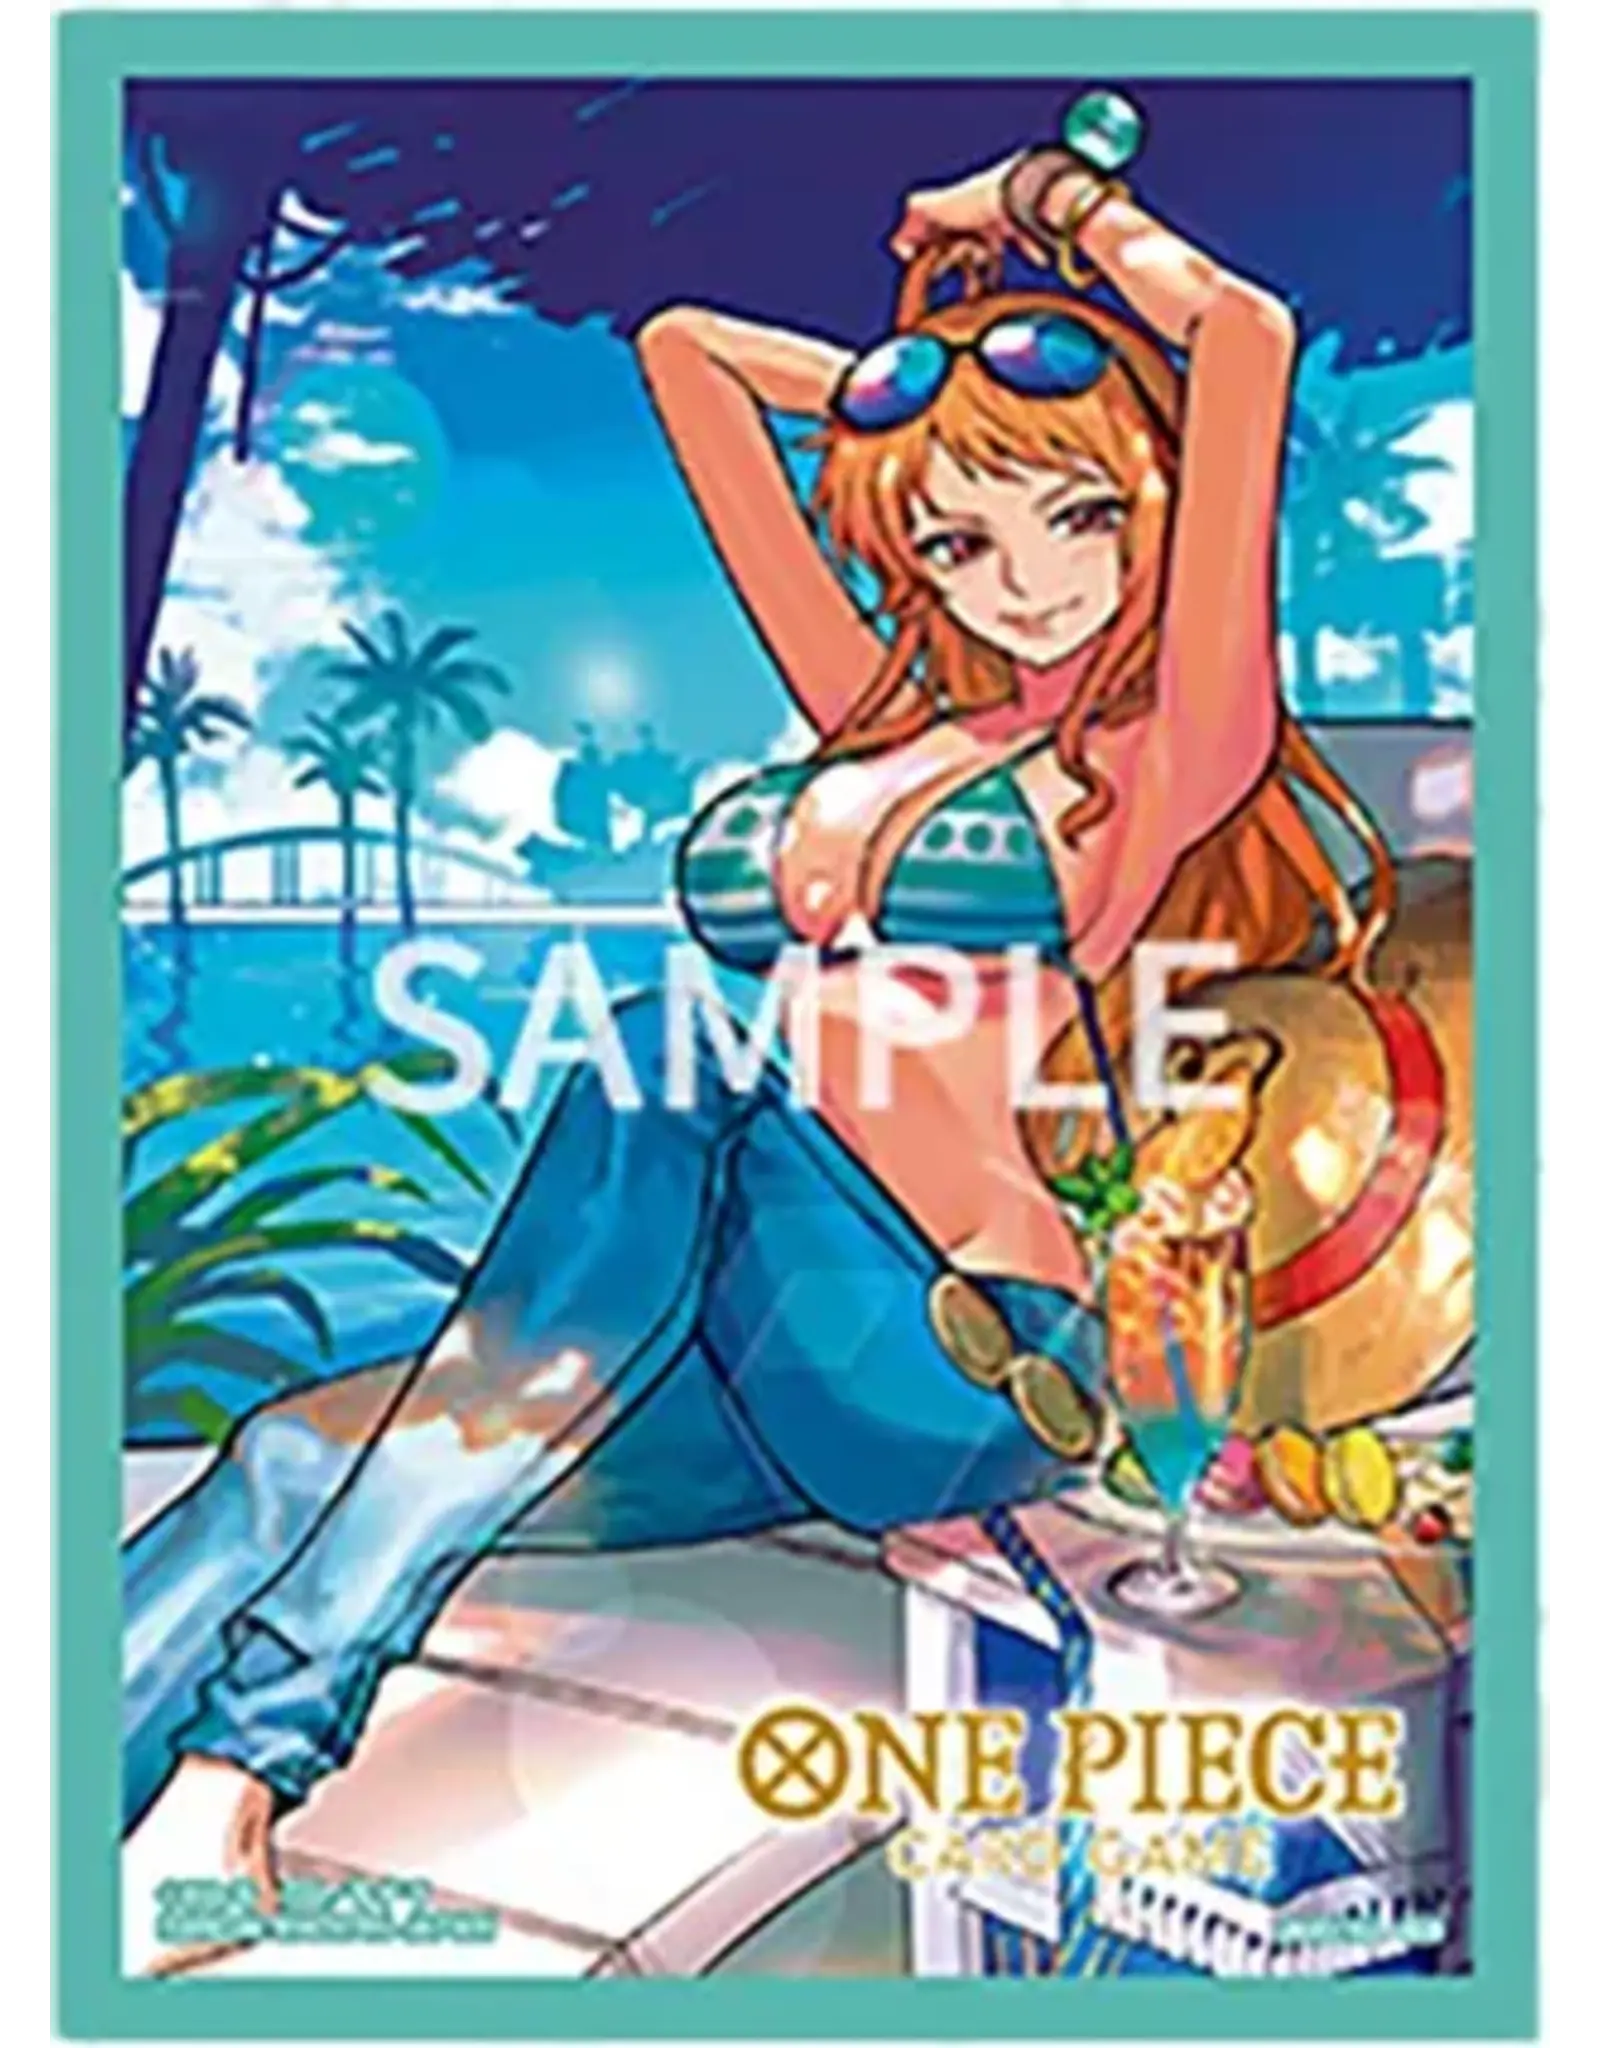 One Piece TCG: Official Sleeves - Nami